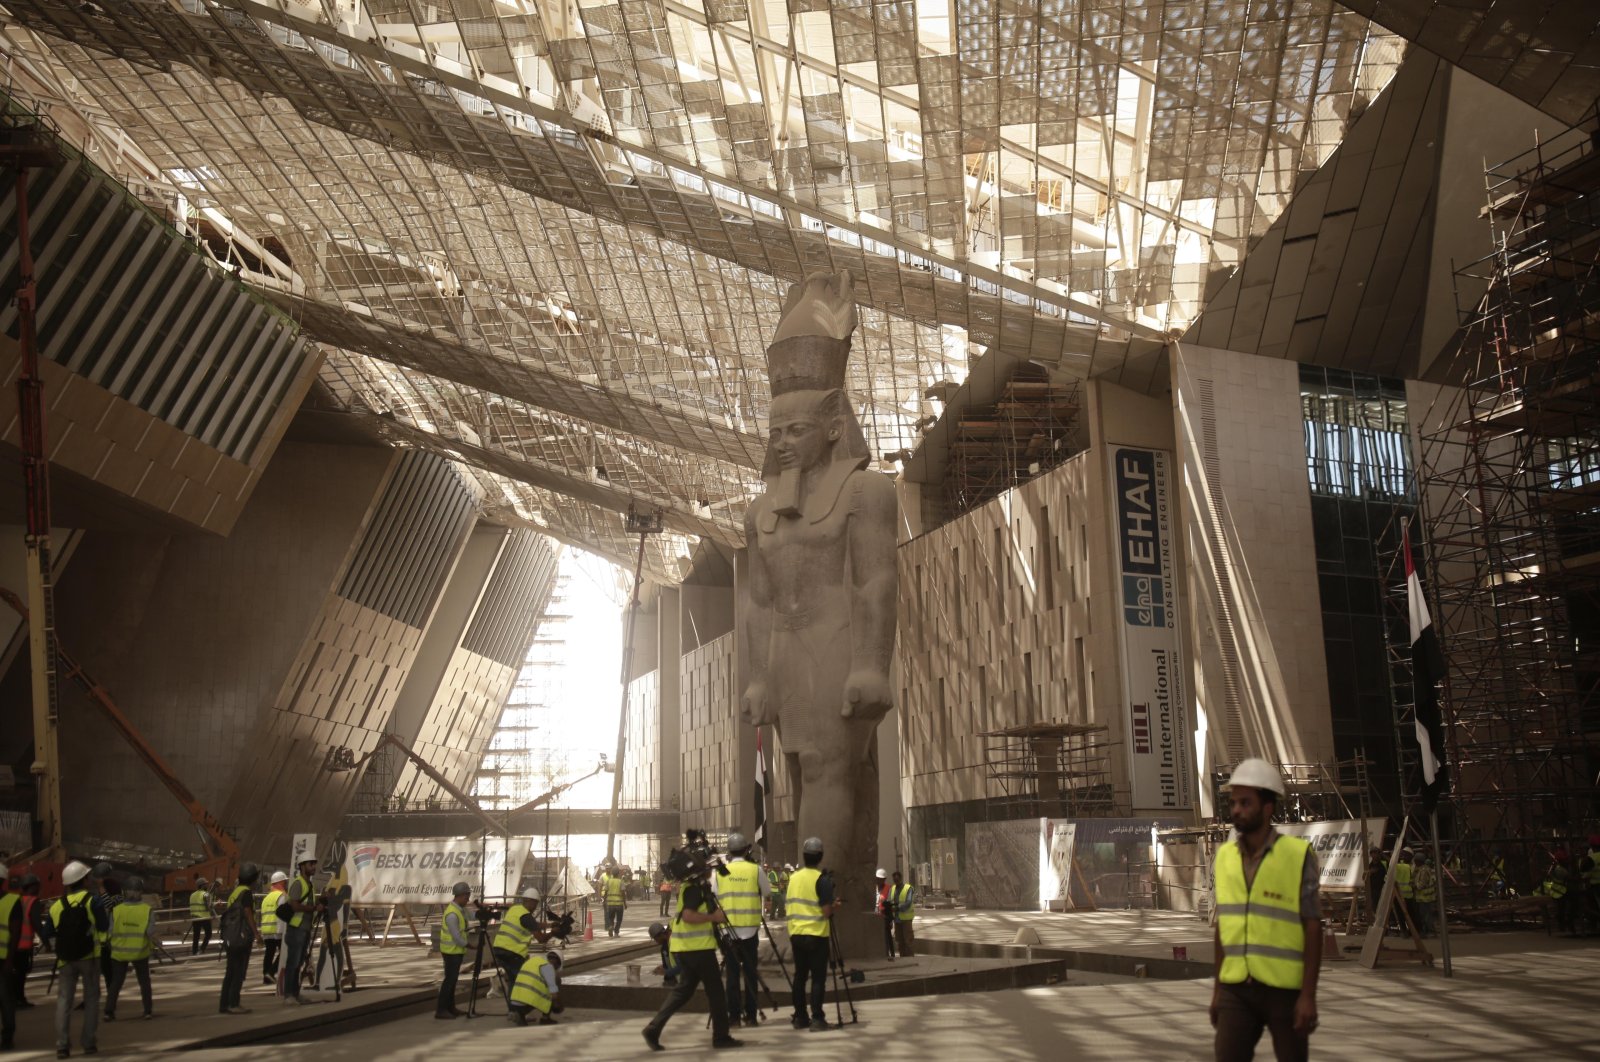 Construction workers and journalists gather at                      the Grand Egyptian Museum under construction in                      Giza, near Cairo, Egypt, Aug. 4, 2019. (AP Photo)